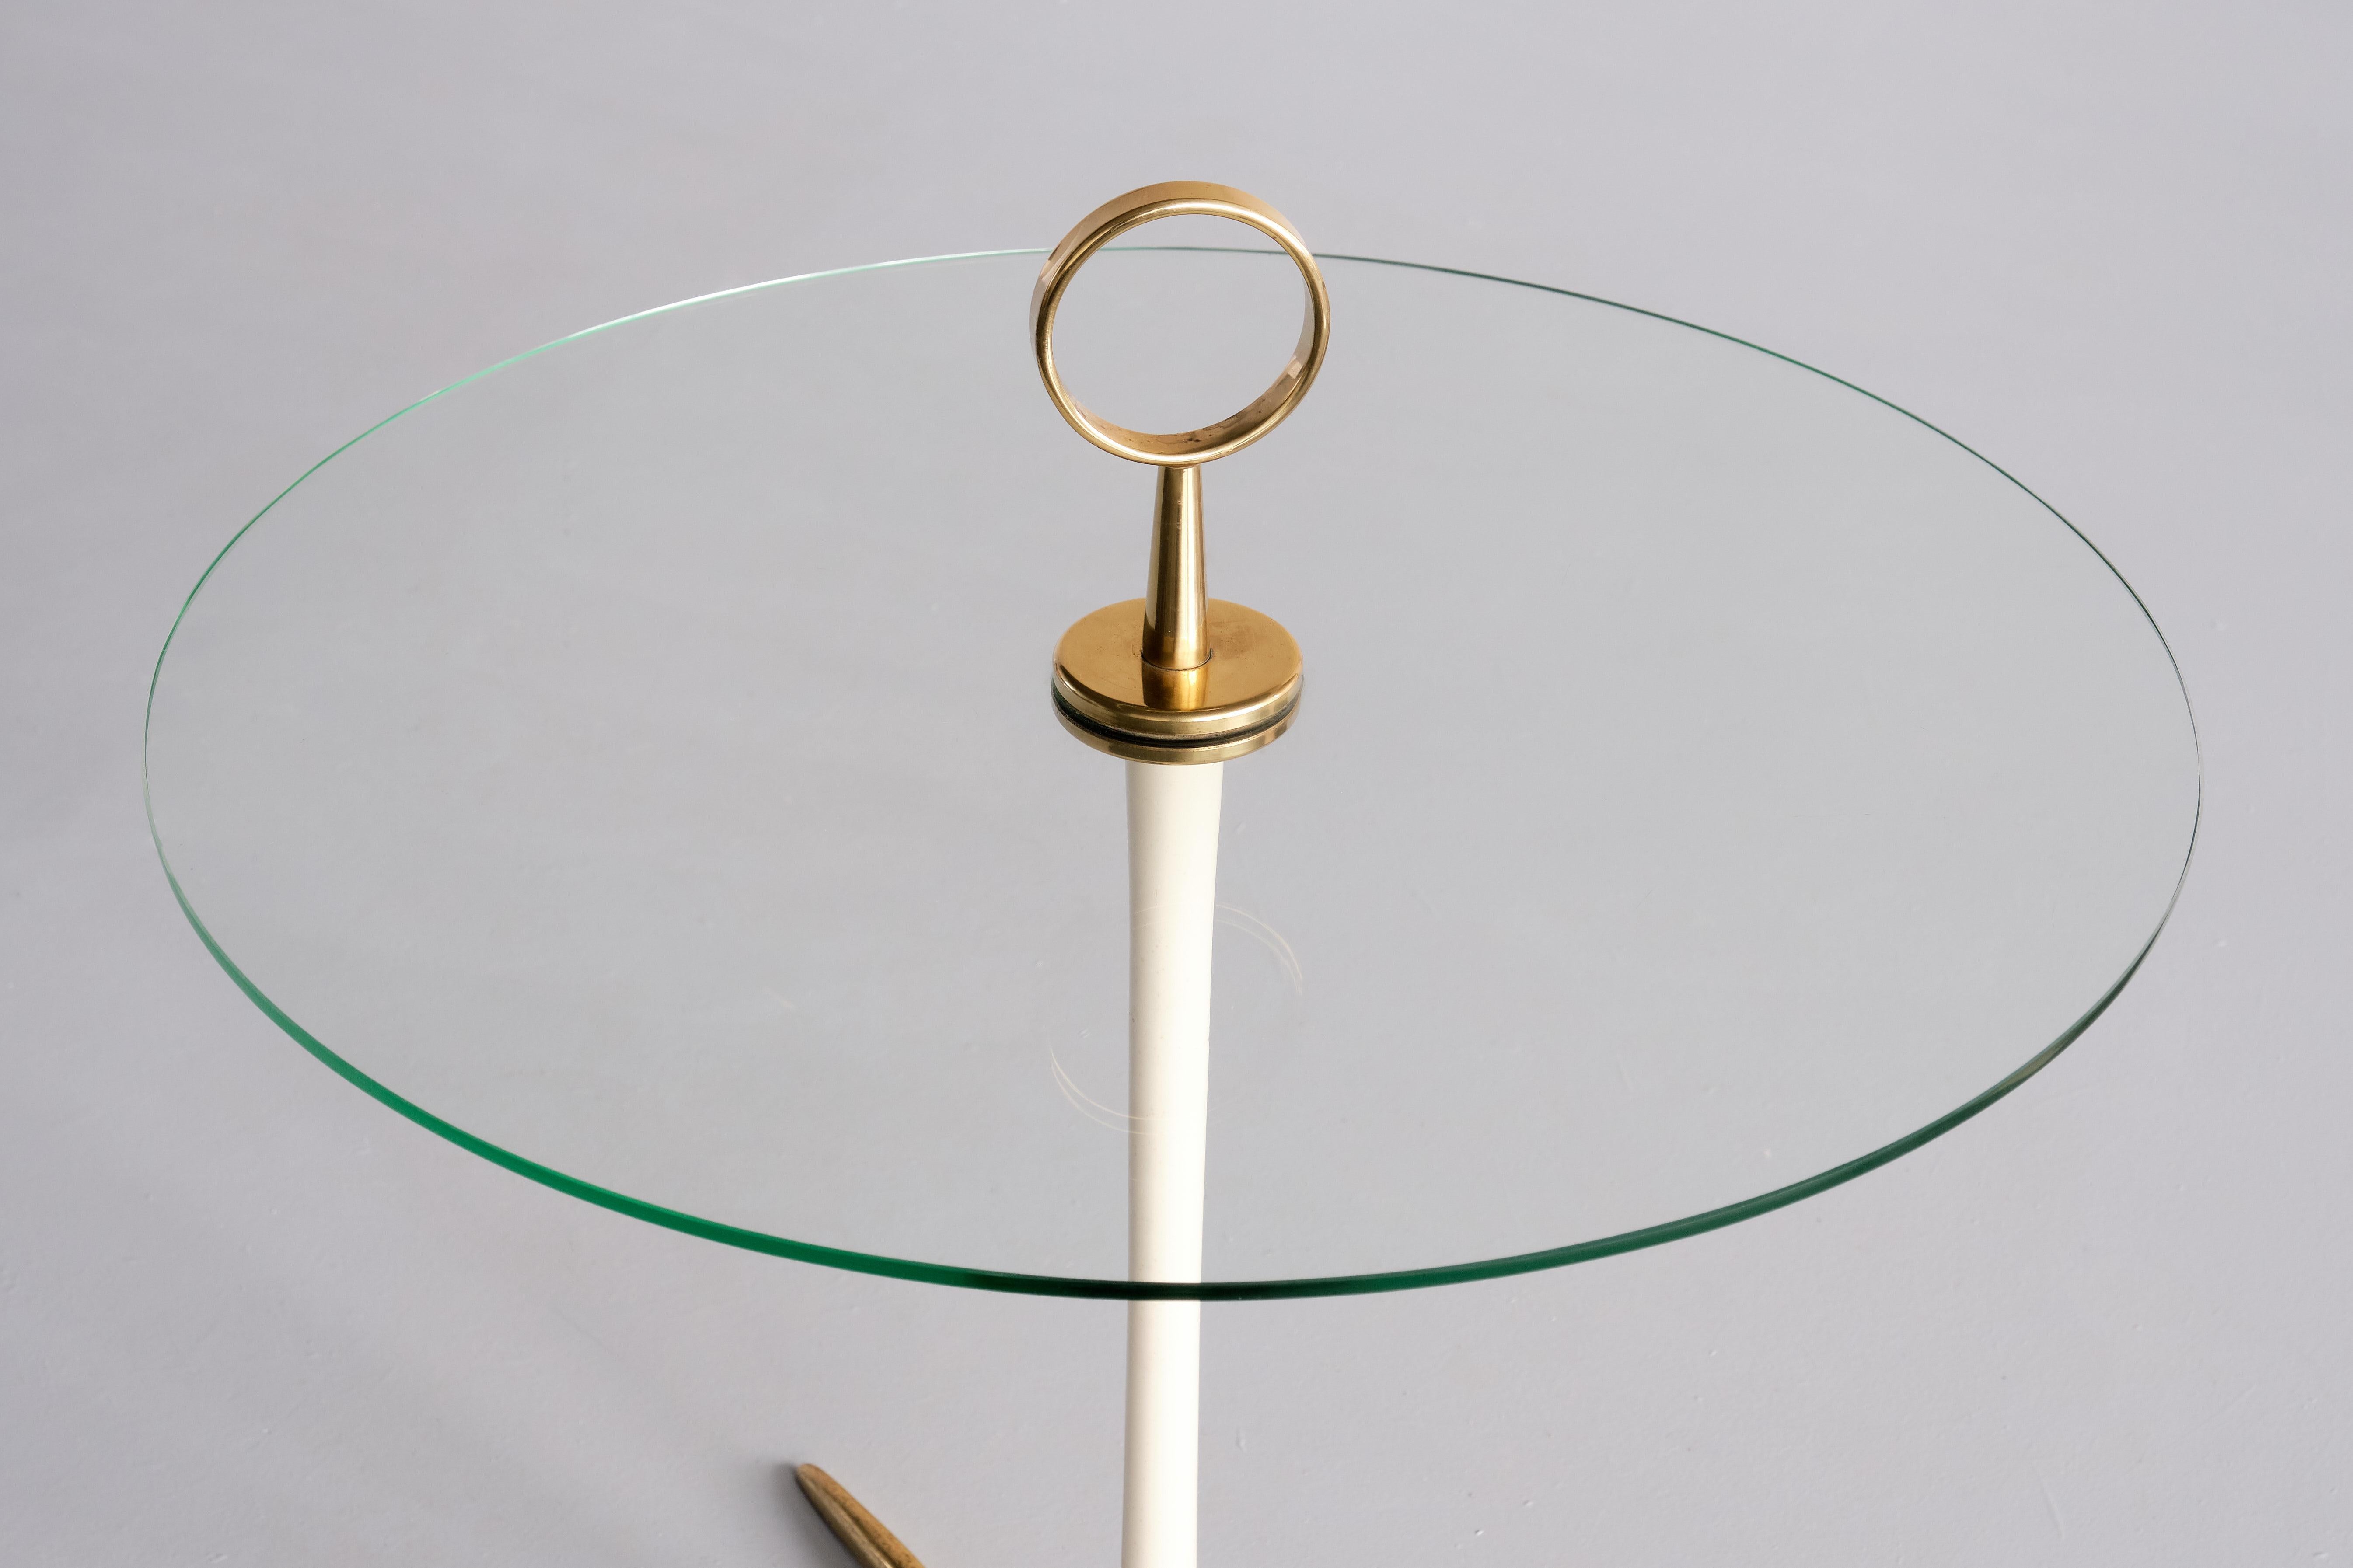 Metal Cesare Lacca Three Legged Side Table in Brass and Glass, Italy, 1955